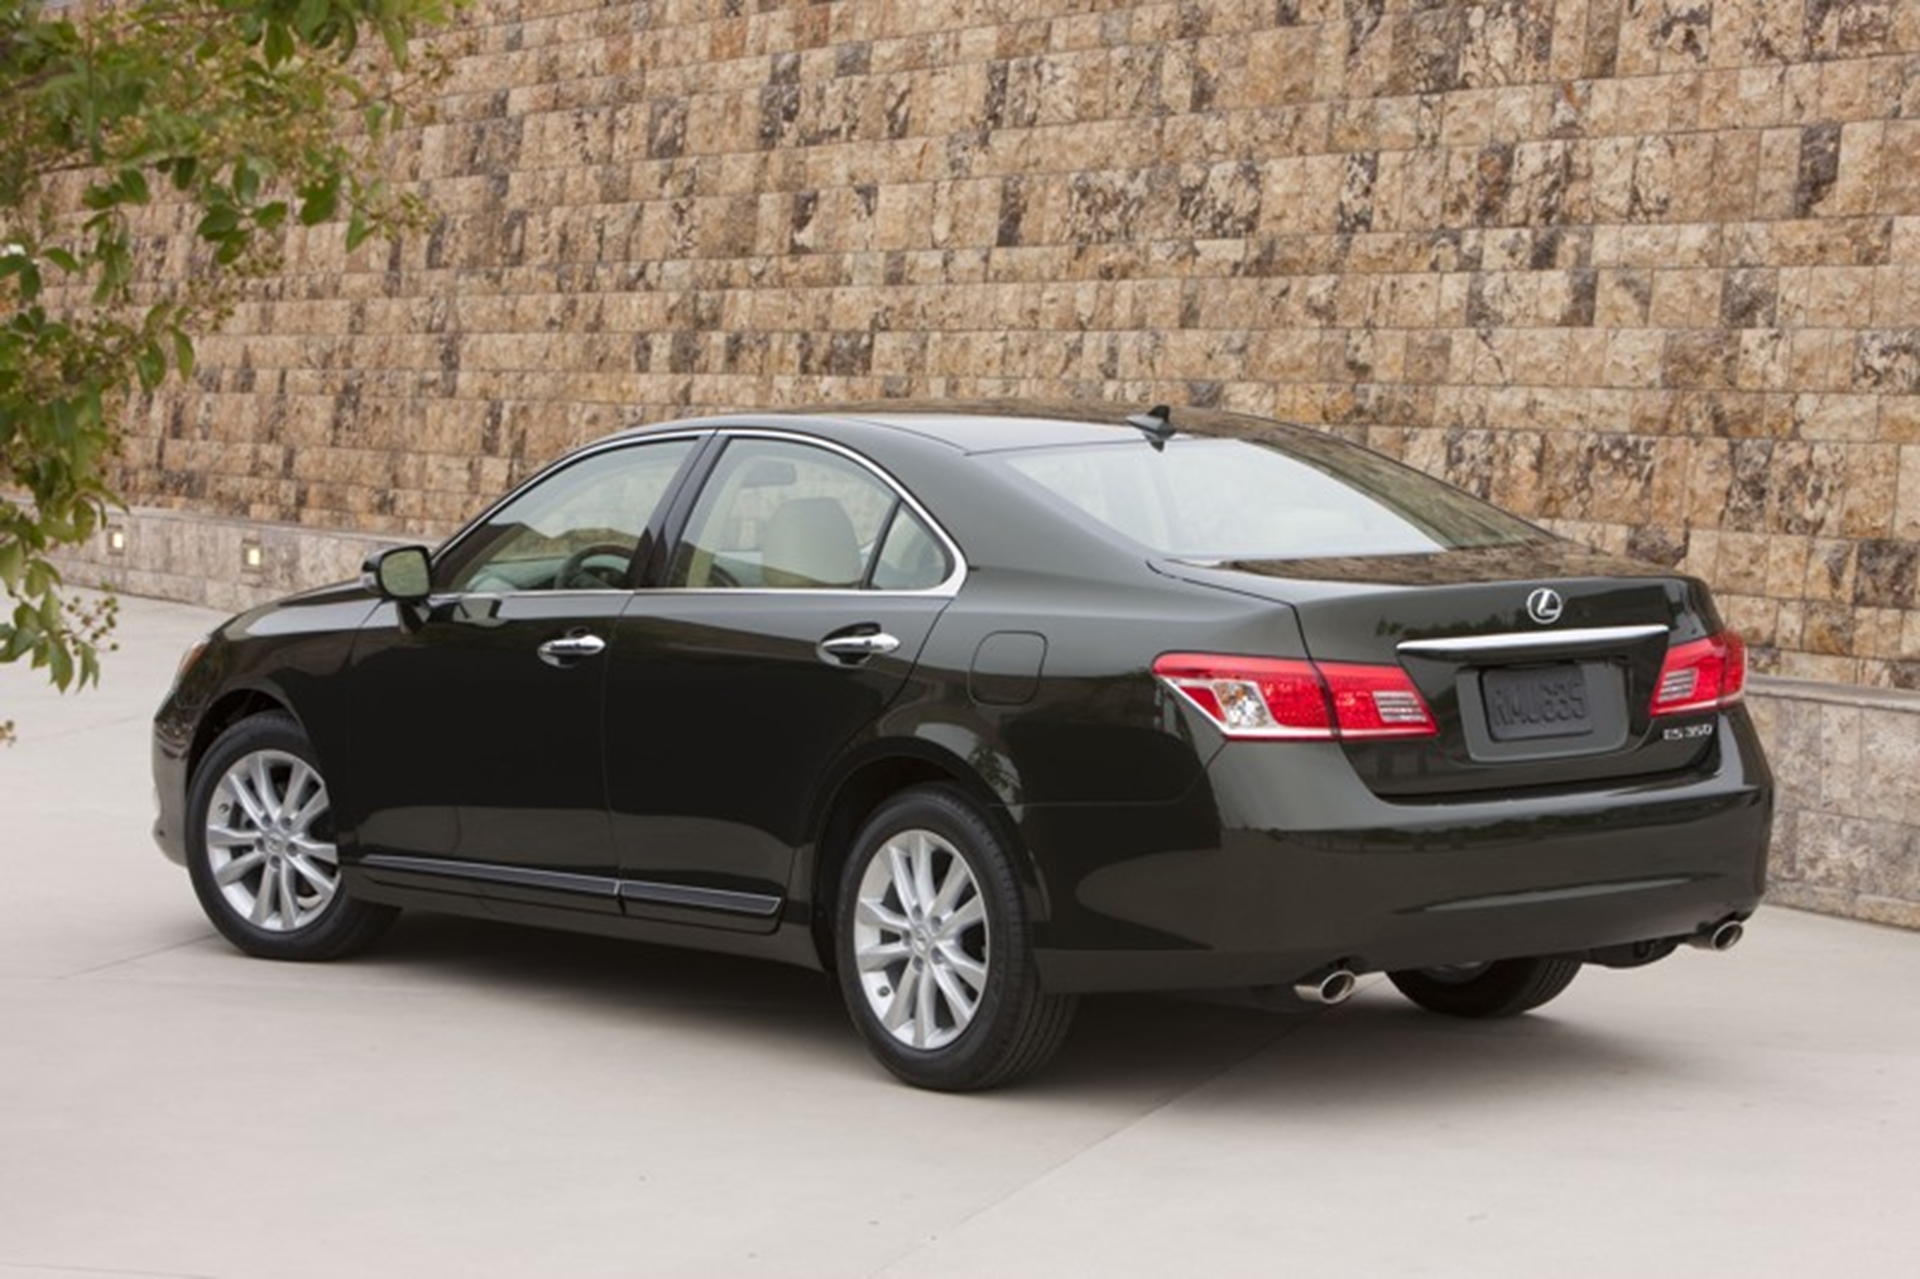 Lexus ES 350 Cruises in Luxury and with Style Using Regular Fuel